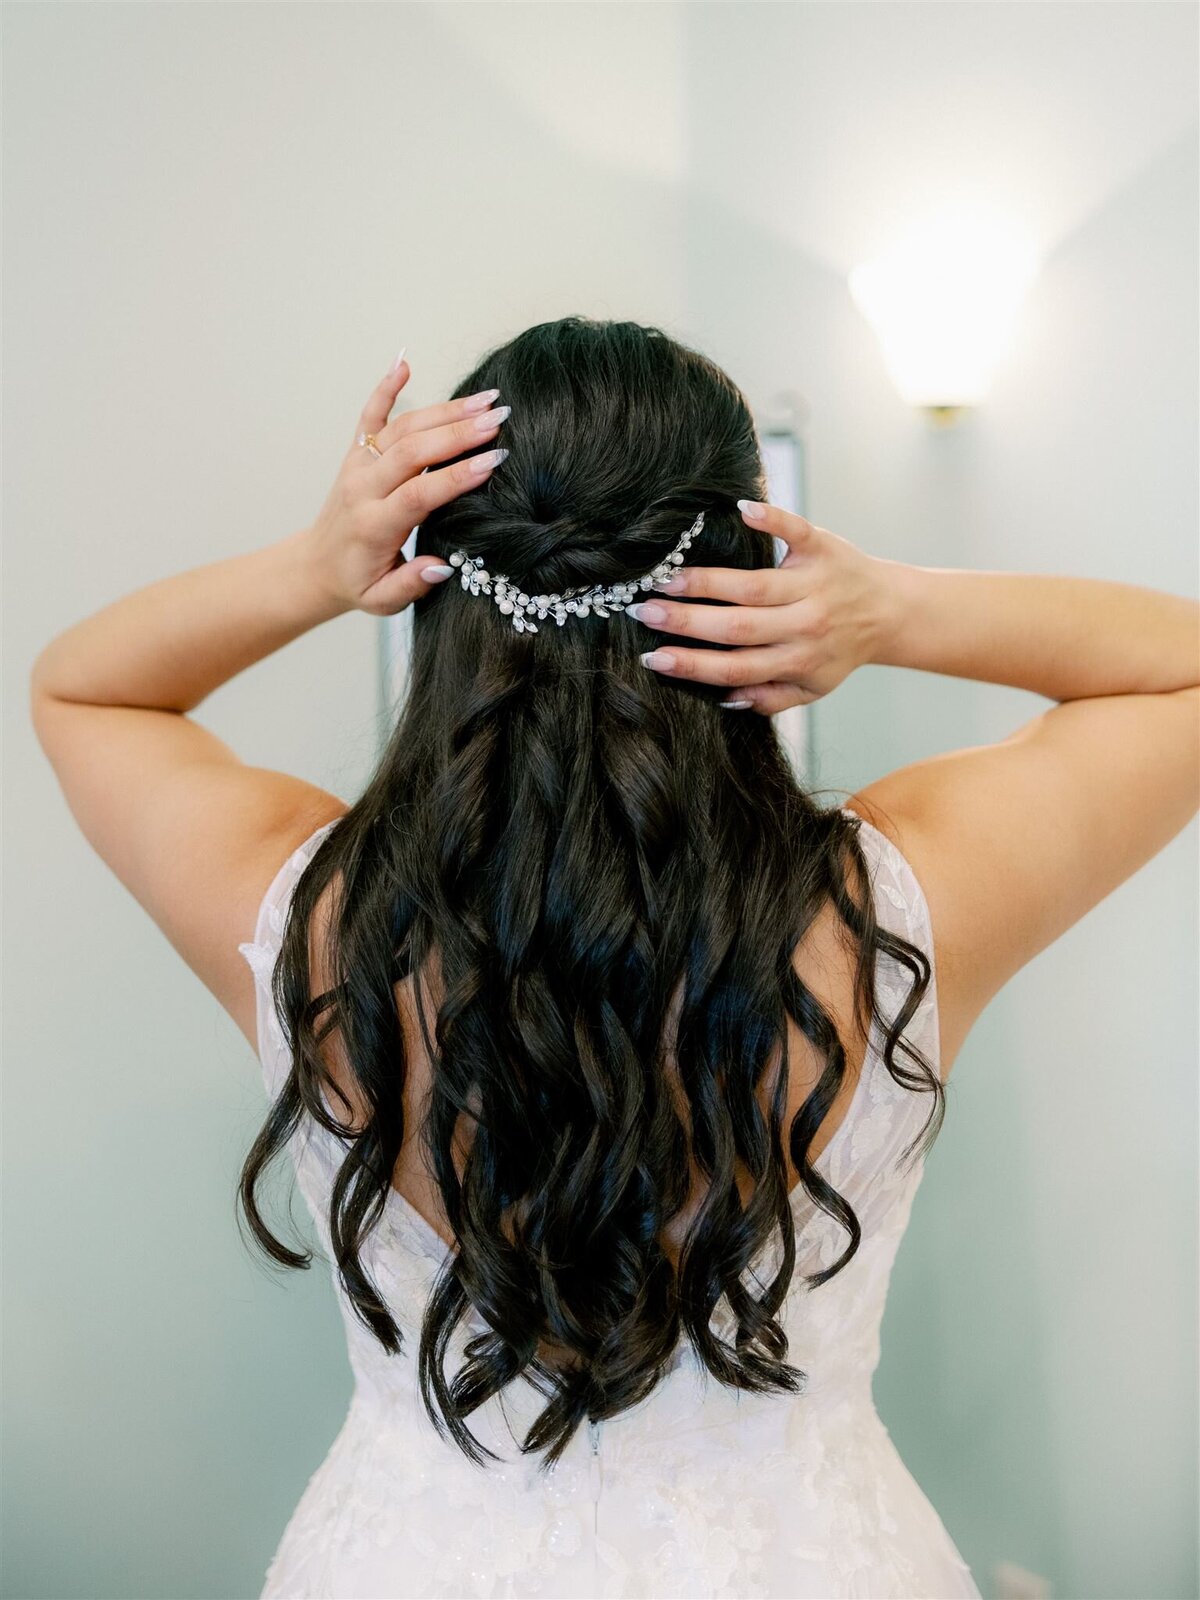 The back of a woman with flowing black hair and tiara.